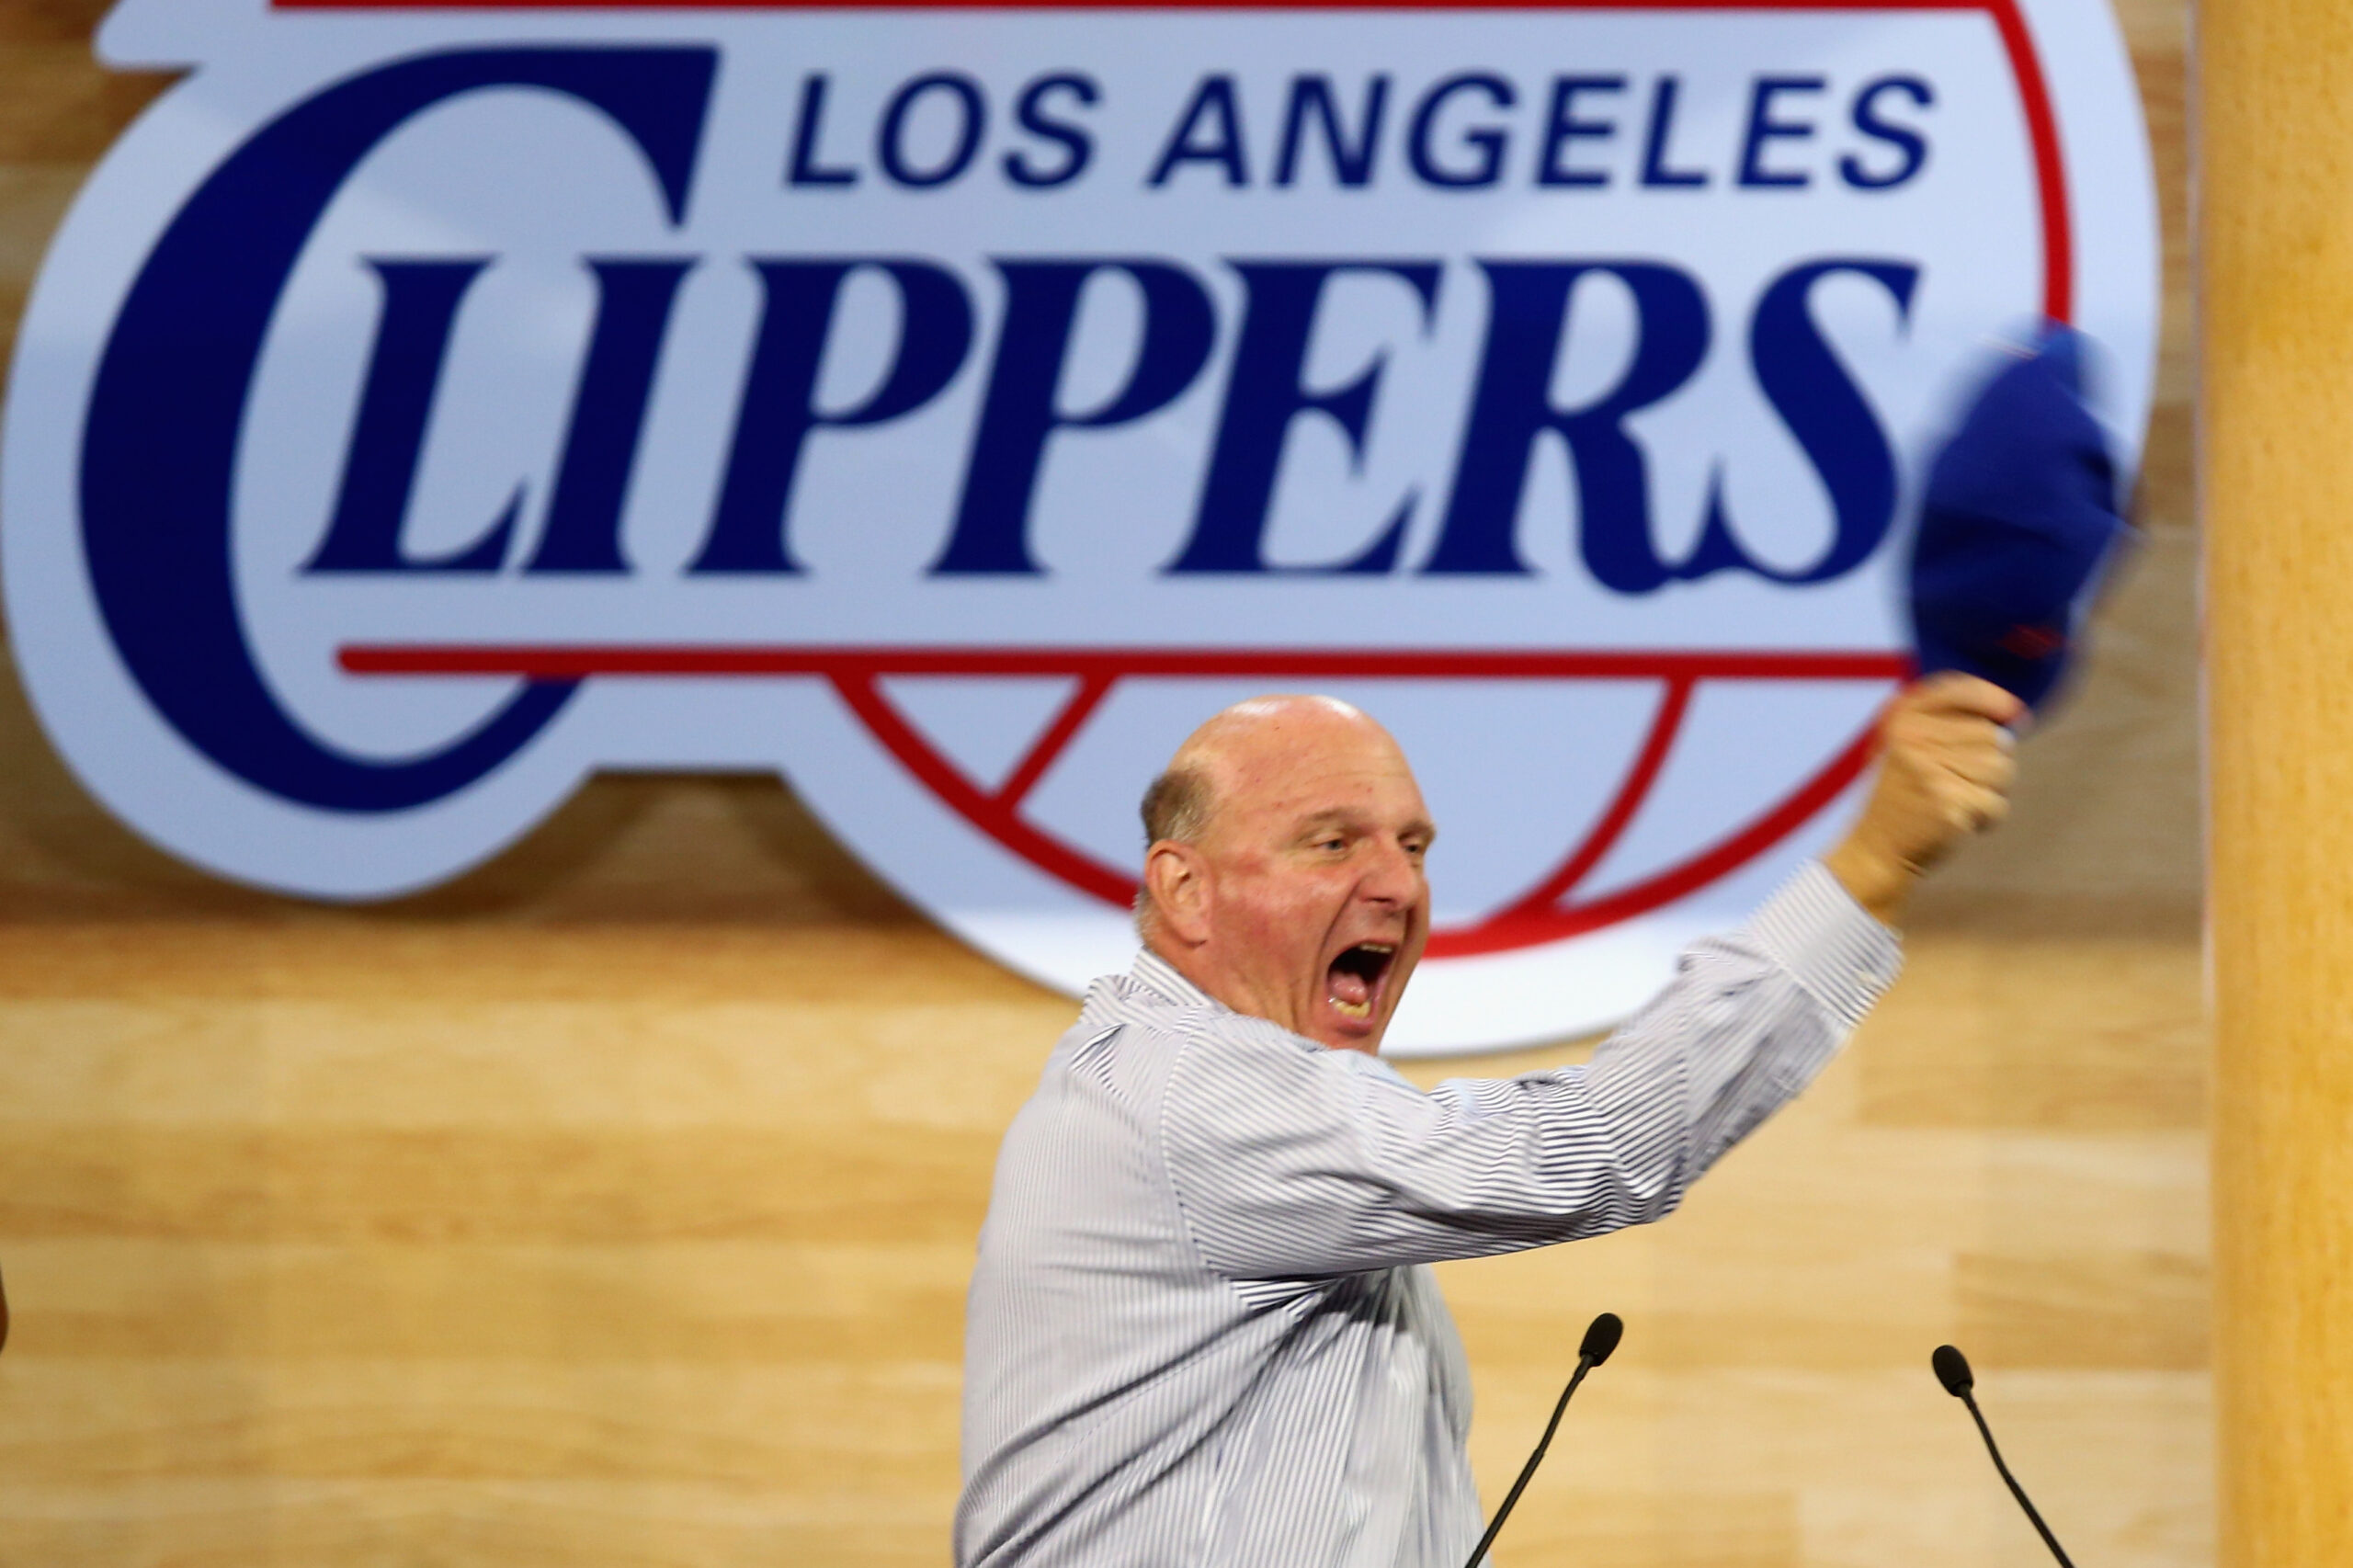 Steve Ballmer, the primary owner of the LA Clippers